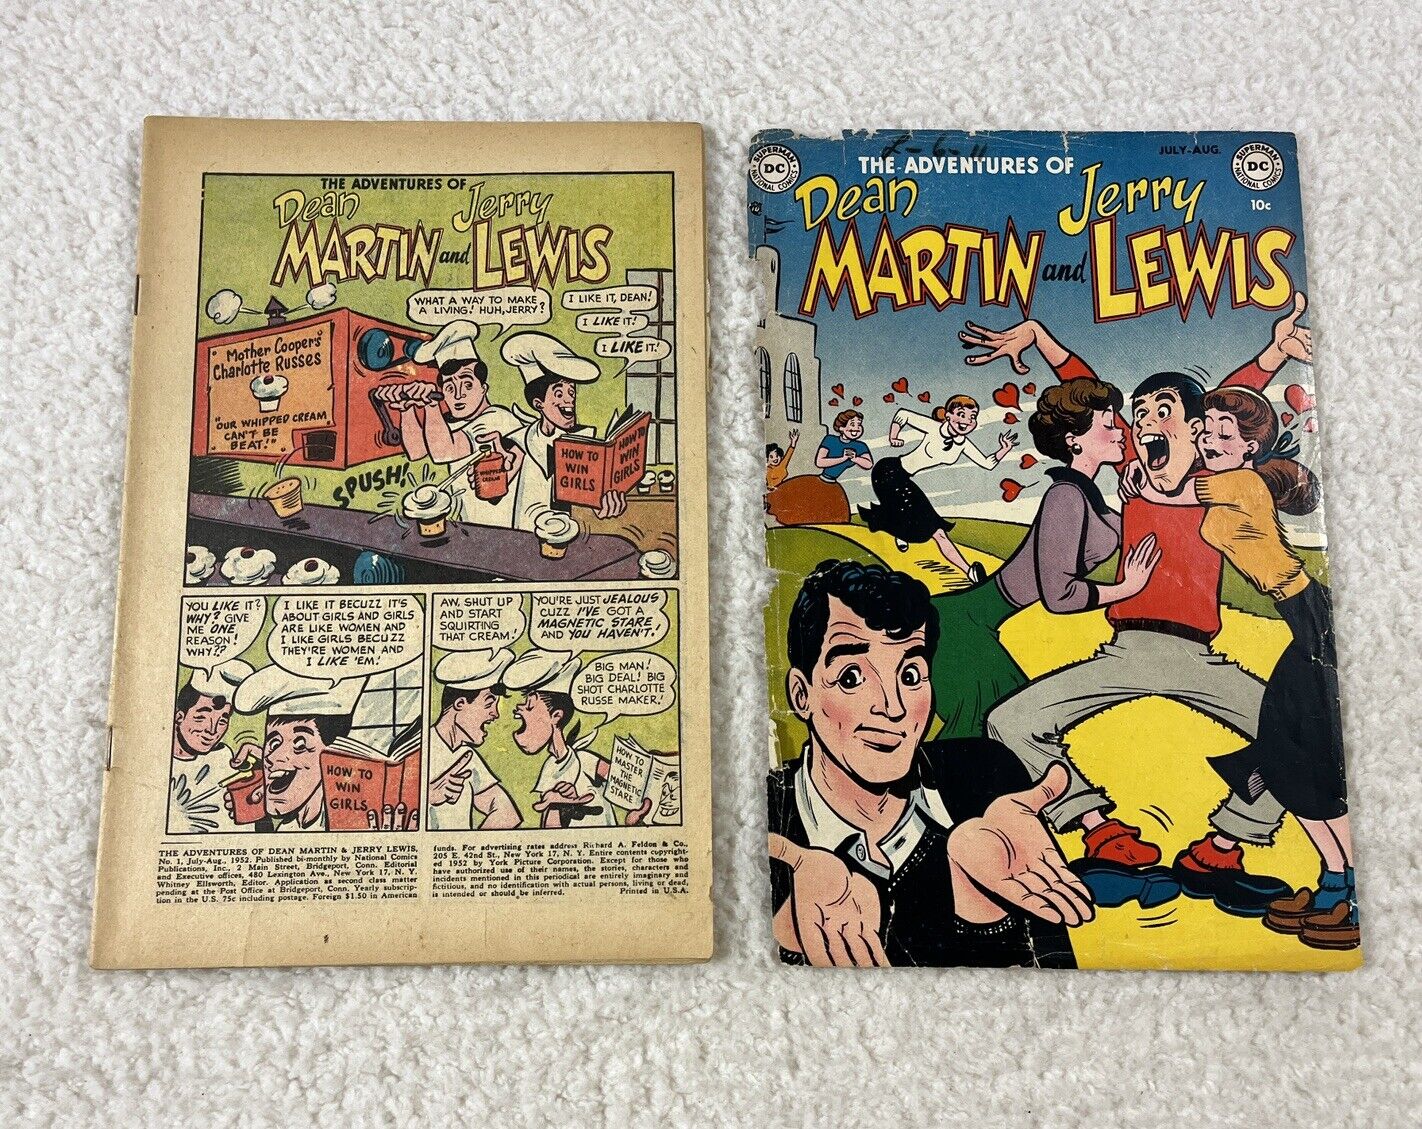 Adventures Of Dean Martin And Jerry Lewis #1 DC Comics 1952 Golden Age